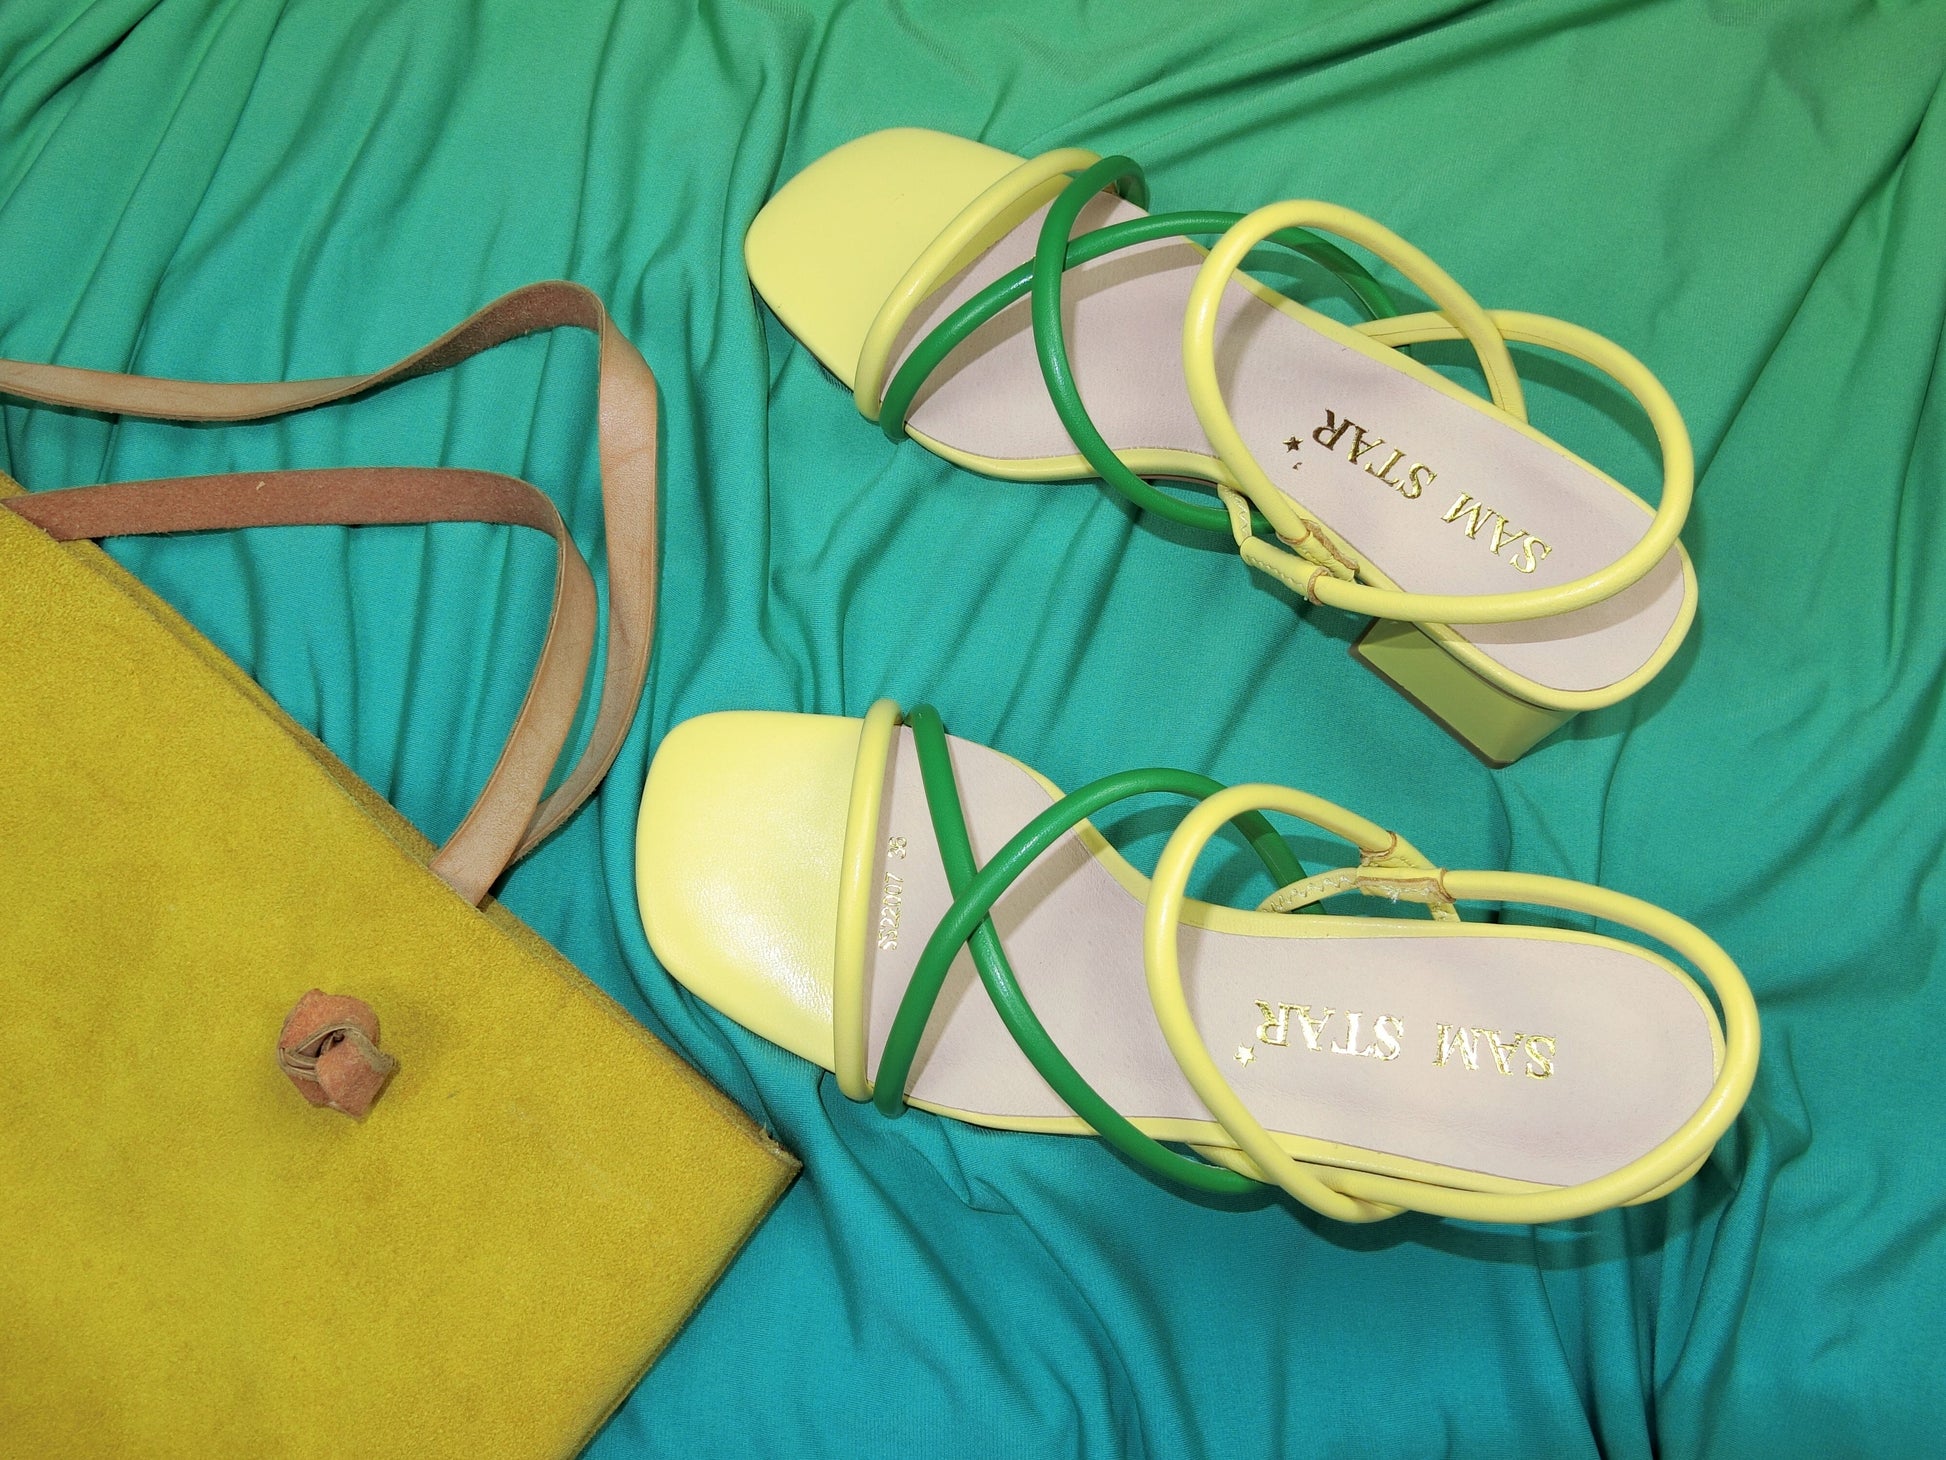 SS22008 Genuine leather strappy block heel sandals in Green and Yellow sandals Sam Star Shoes Green/Yellow 39/6 